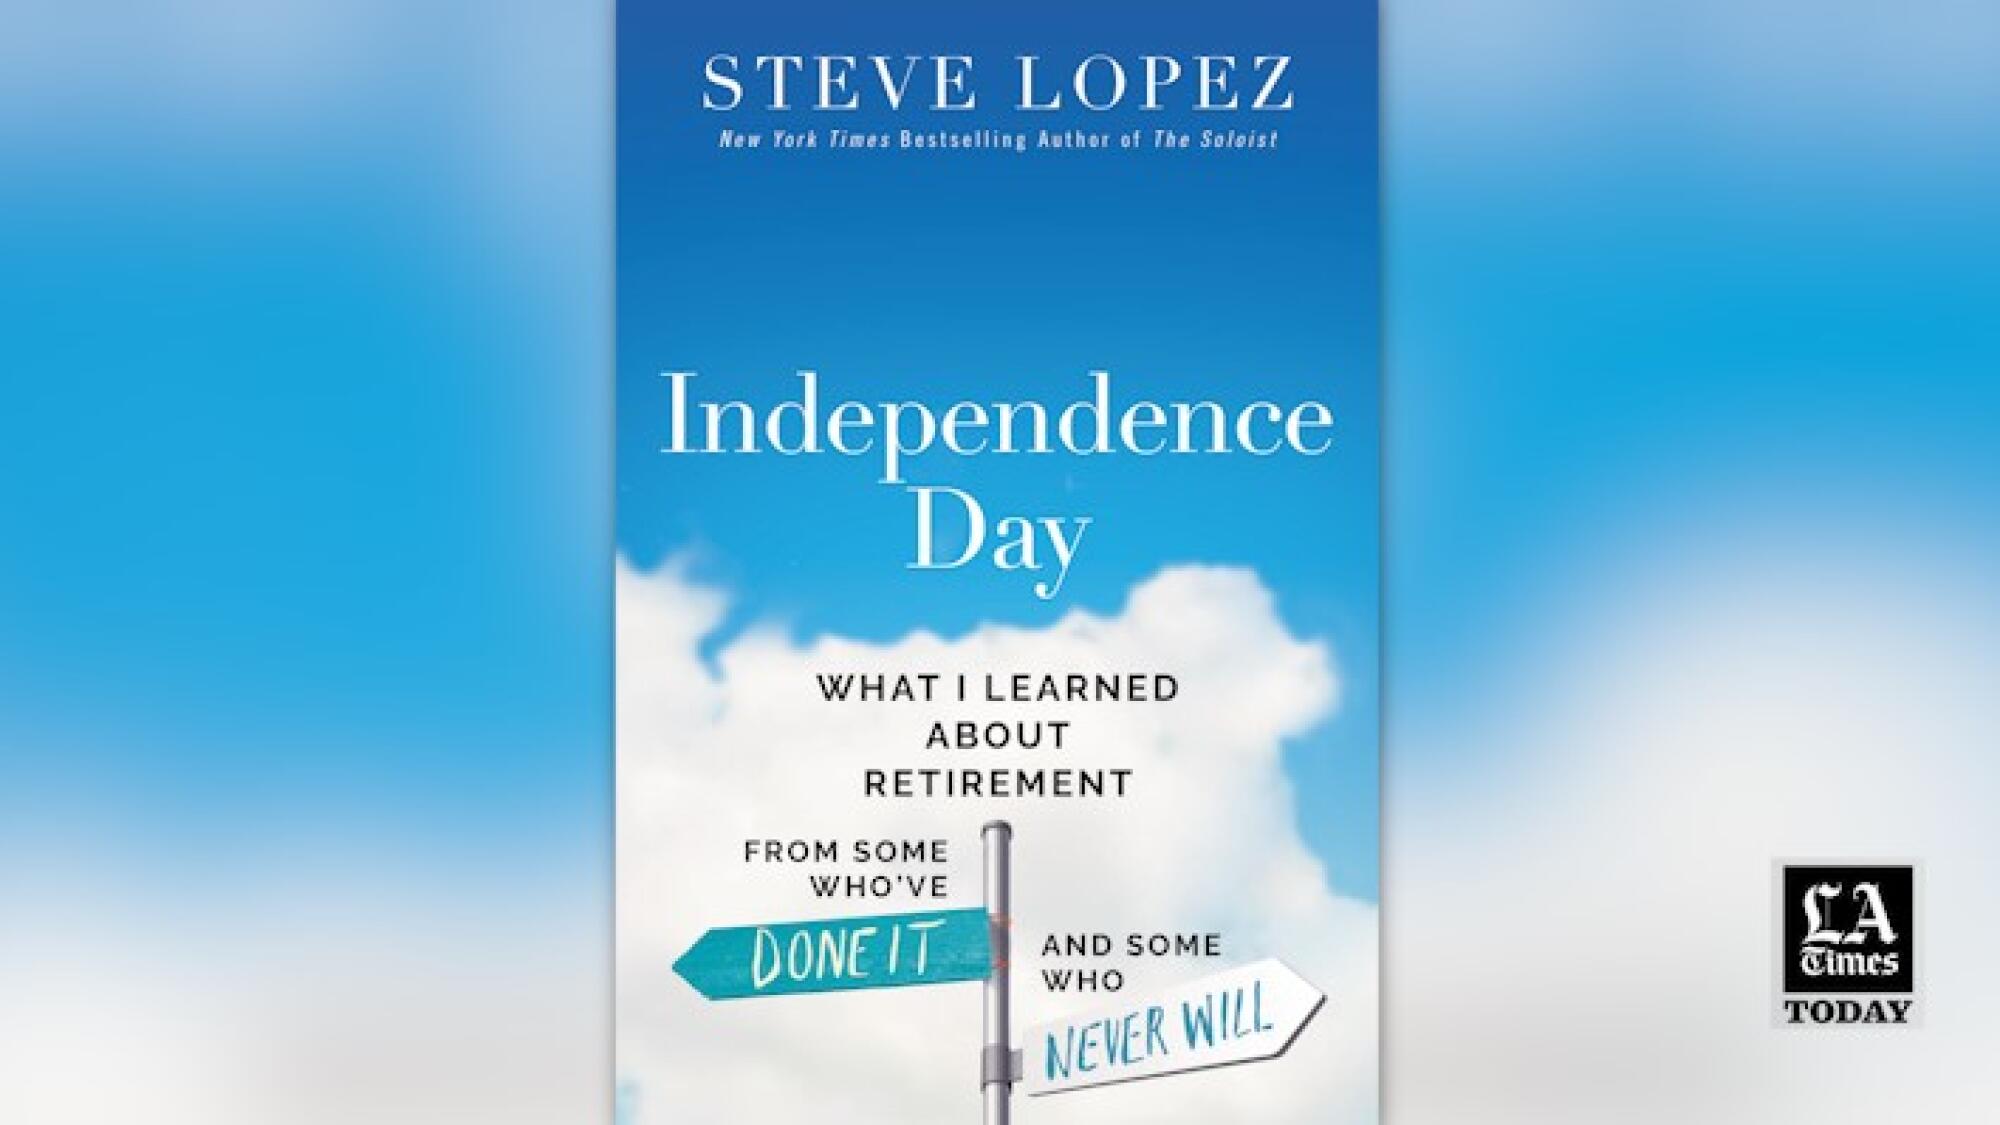 Steve Lopez discusses Independence Day: What I Learned about